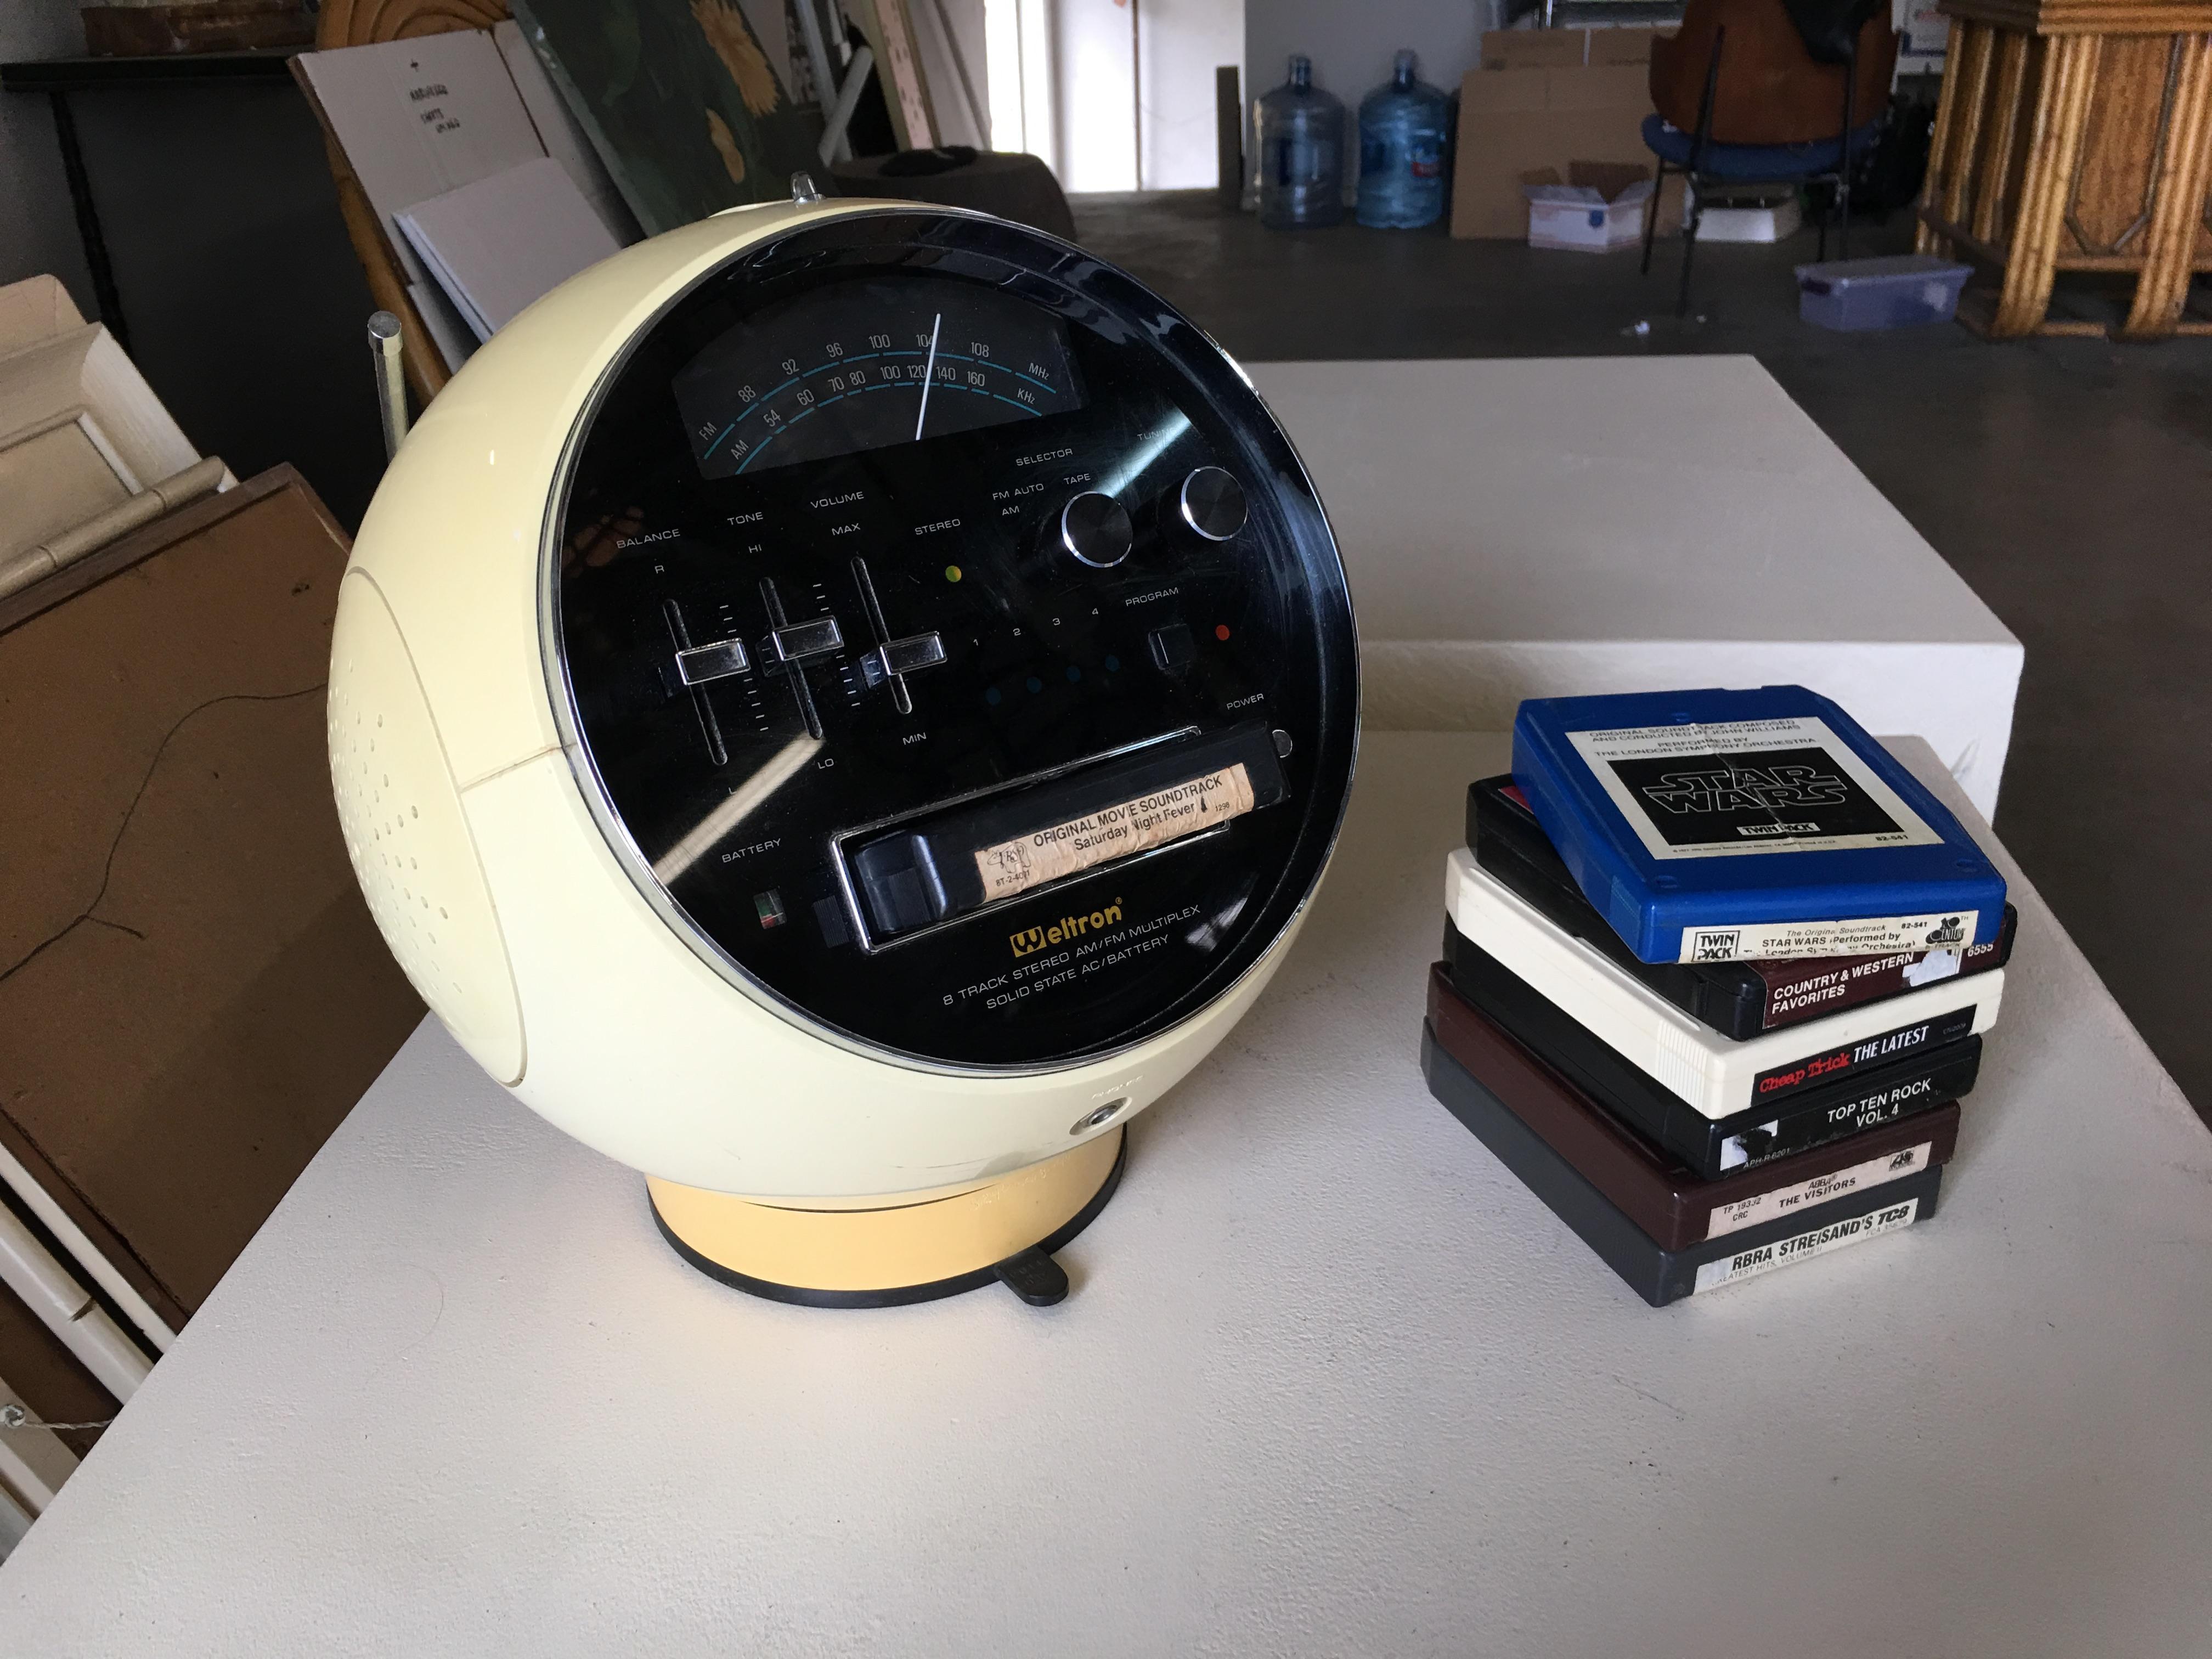 Fully functioning ultra-modern model 2001 space ball AM/FM stereo with 8 track player. This rare unit was produced by Weltron and features stereo sound with hidden top handle and swivels to any direction for easy operation. All 8 tracks pictured are